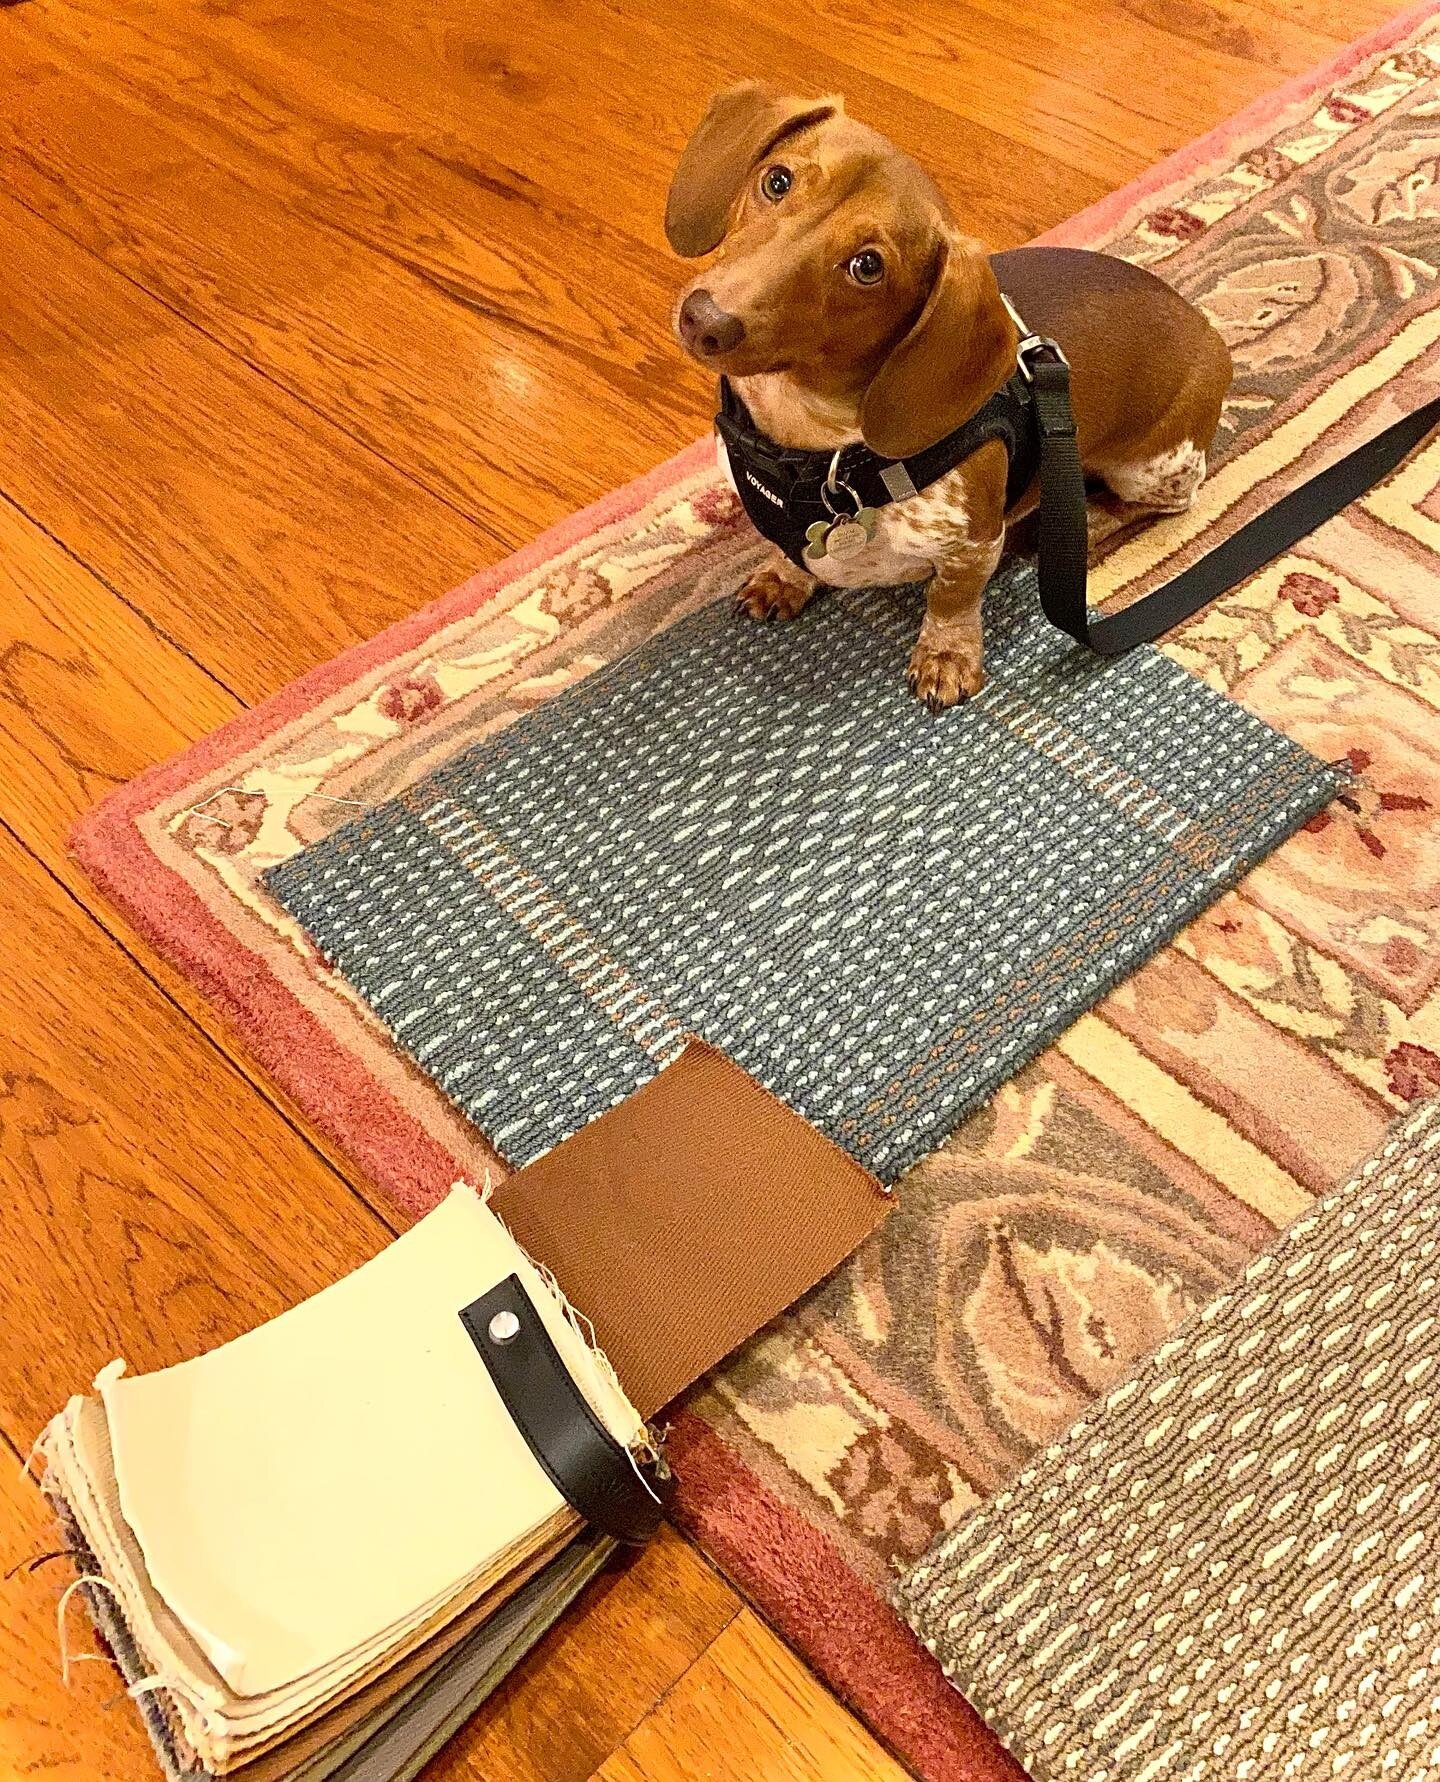 Did someone say &ldquo;New Area Rug with Contrast Binding&rdquo;?!

No, we actually said &ldquo;Puppacino&rdquo;&hellip;but either way Dallas is paws on the new look for his house! See you in a few weeks buddy with your new rugs!

I love In Home Cons